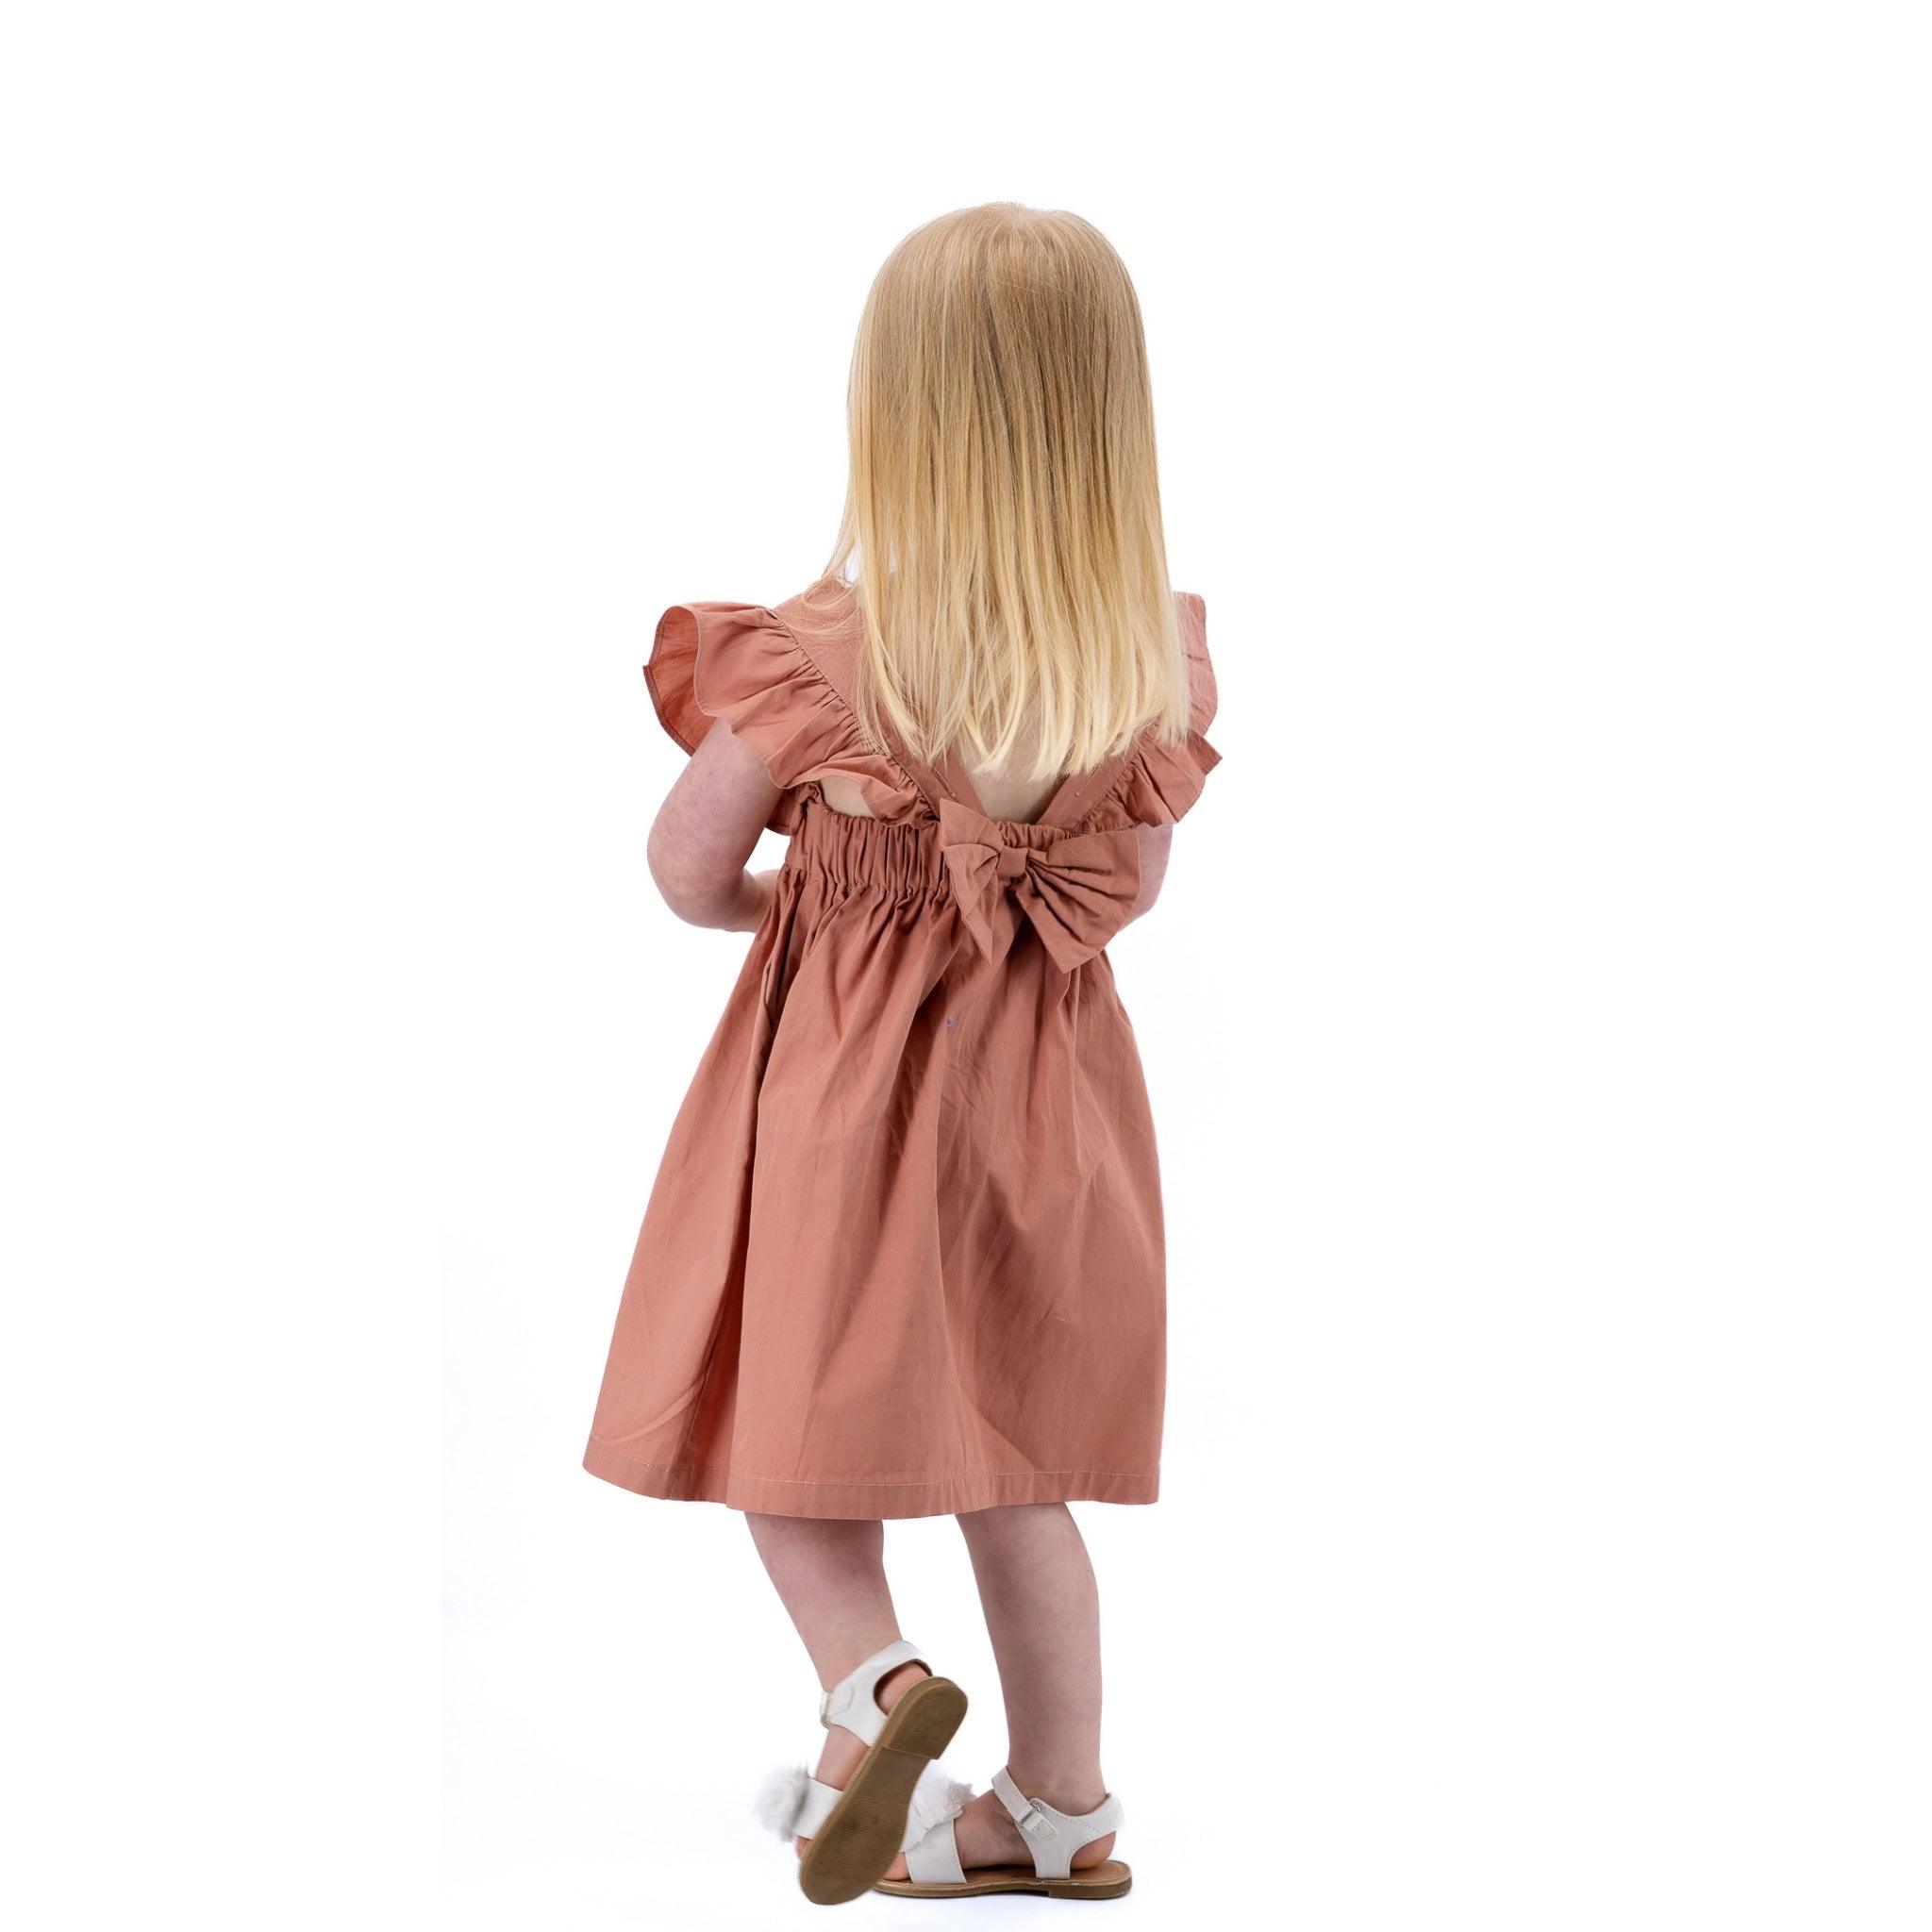 Young girl in a Brick Dust Cotton Floral Dress for Girls by Karee seen from behind, standing against a white background.